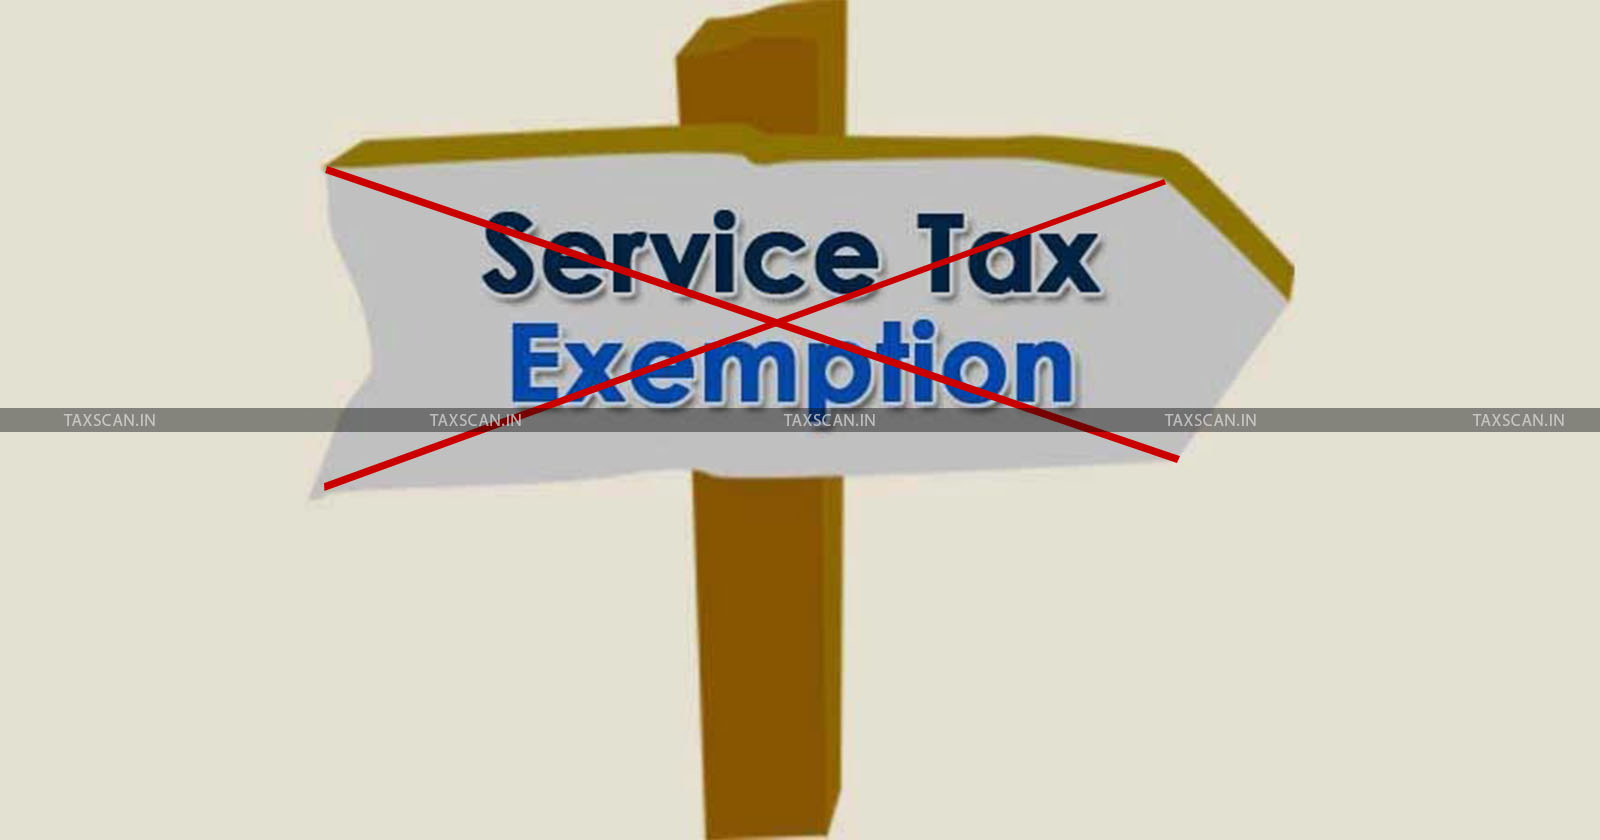 Composite Nature - Finance Act - Service Tax Exemption - Tax Exemption - Service Tax - TAXSCAN